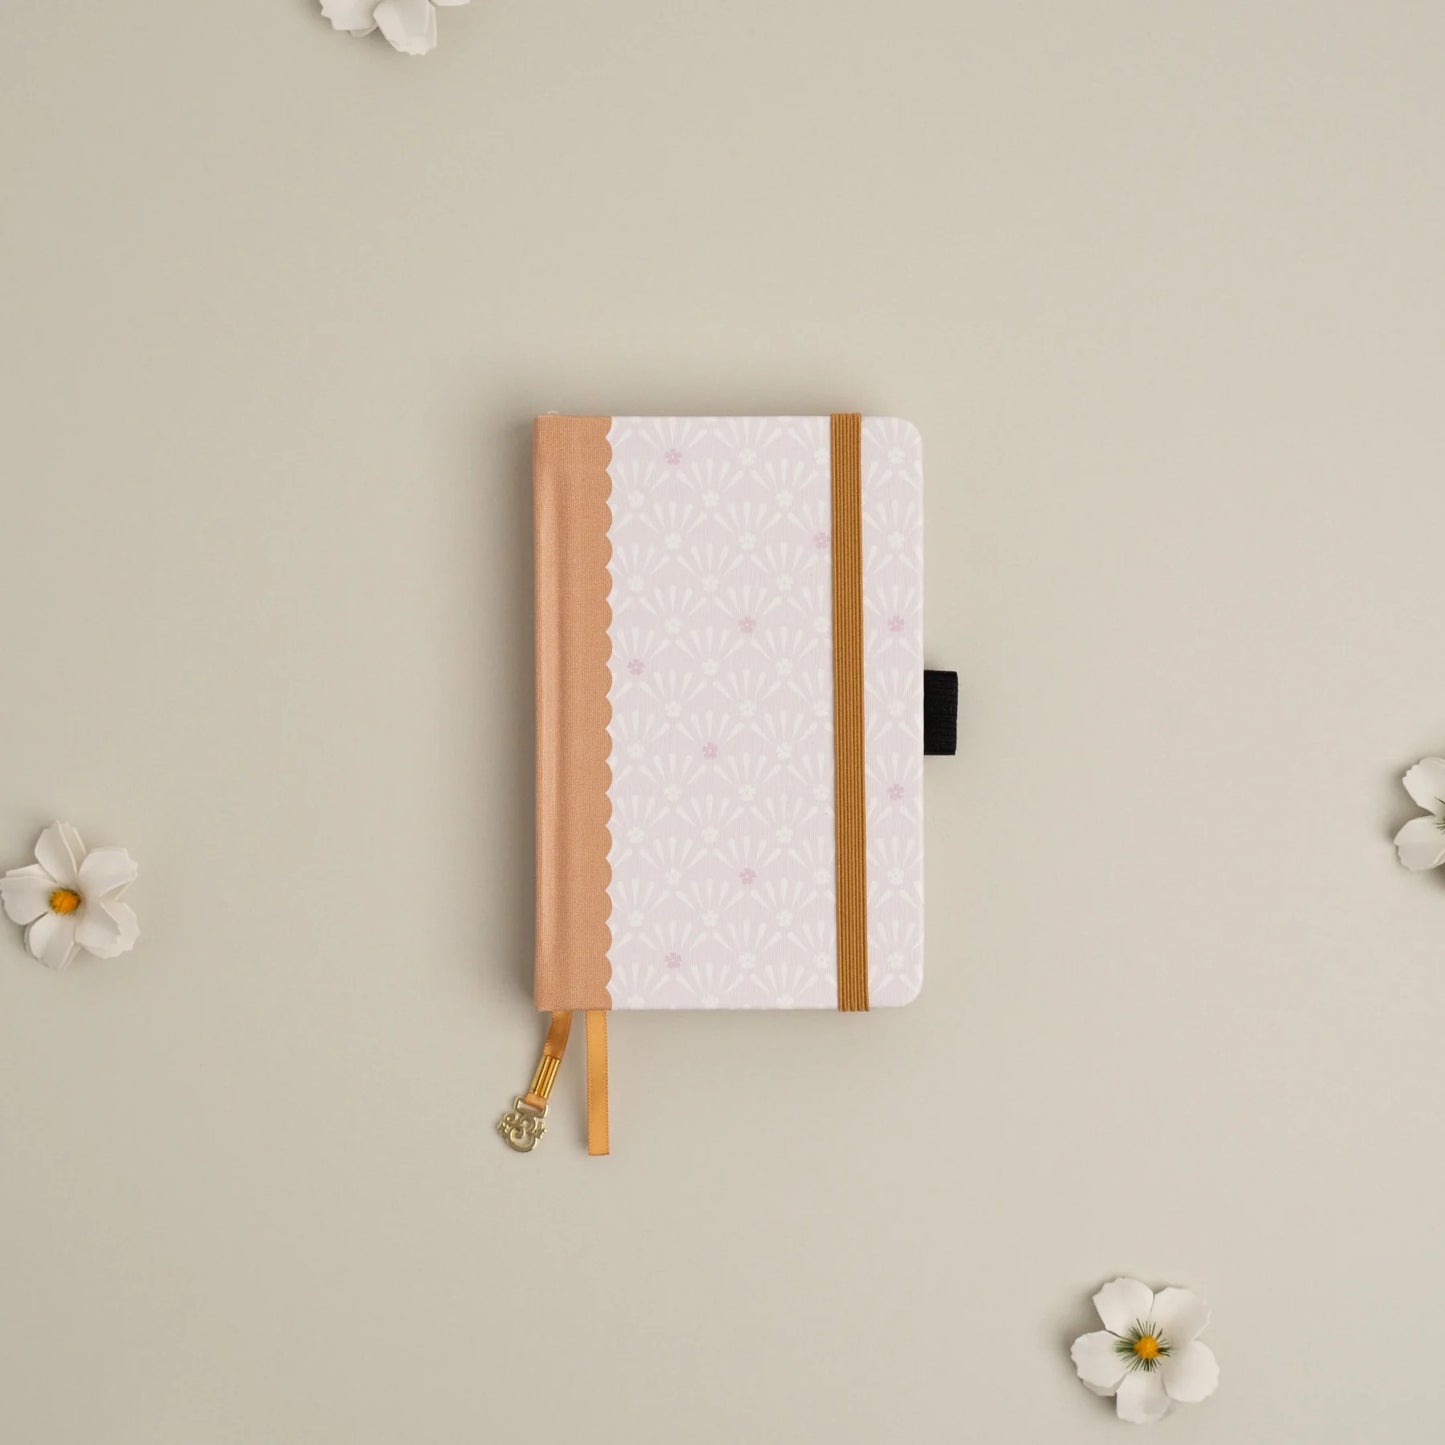 A6 Picnic Blanket - White Dot Grid Notebook (Picnic Subscription Box)